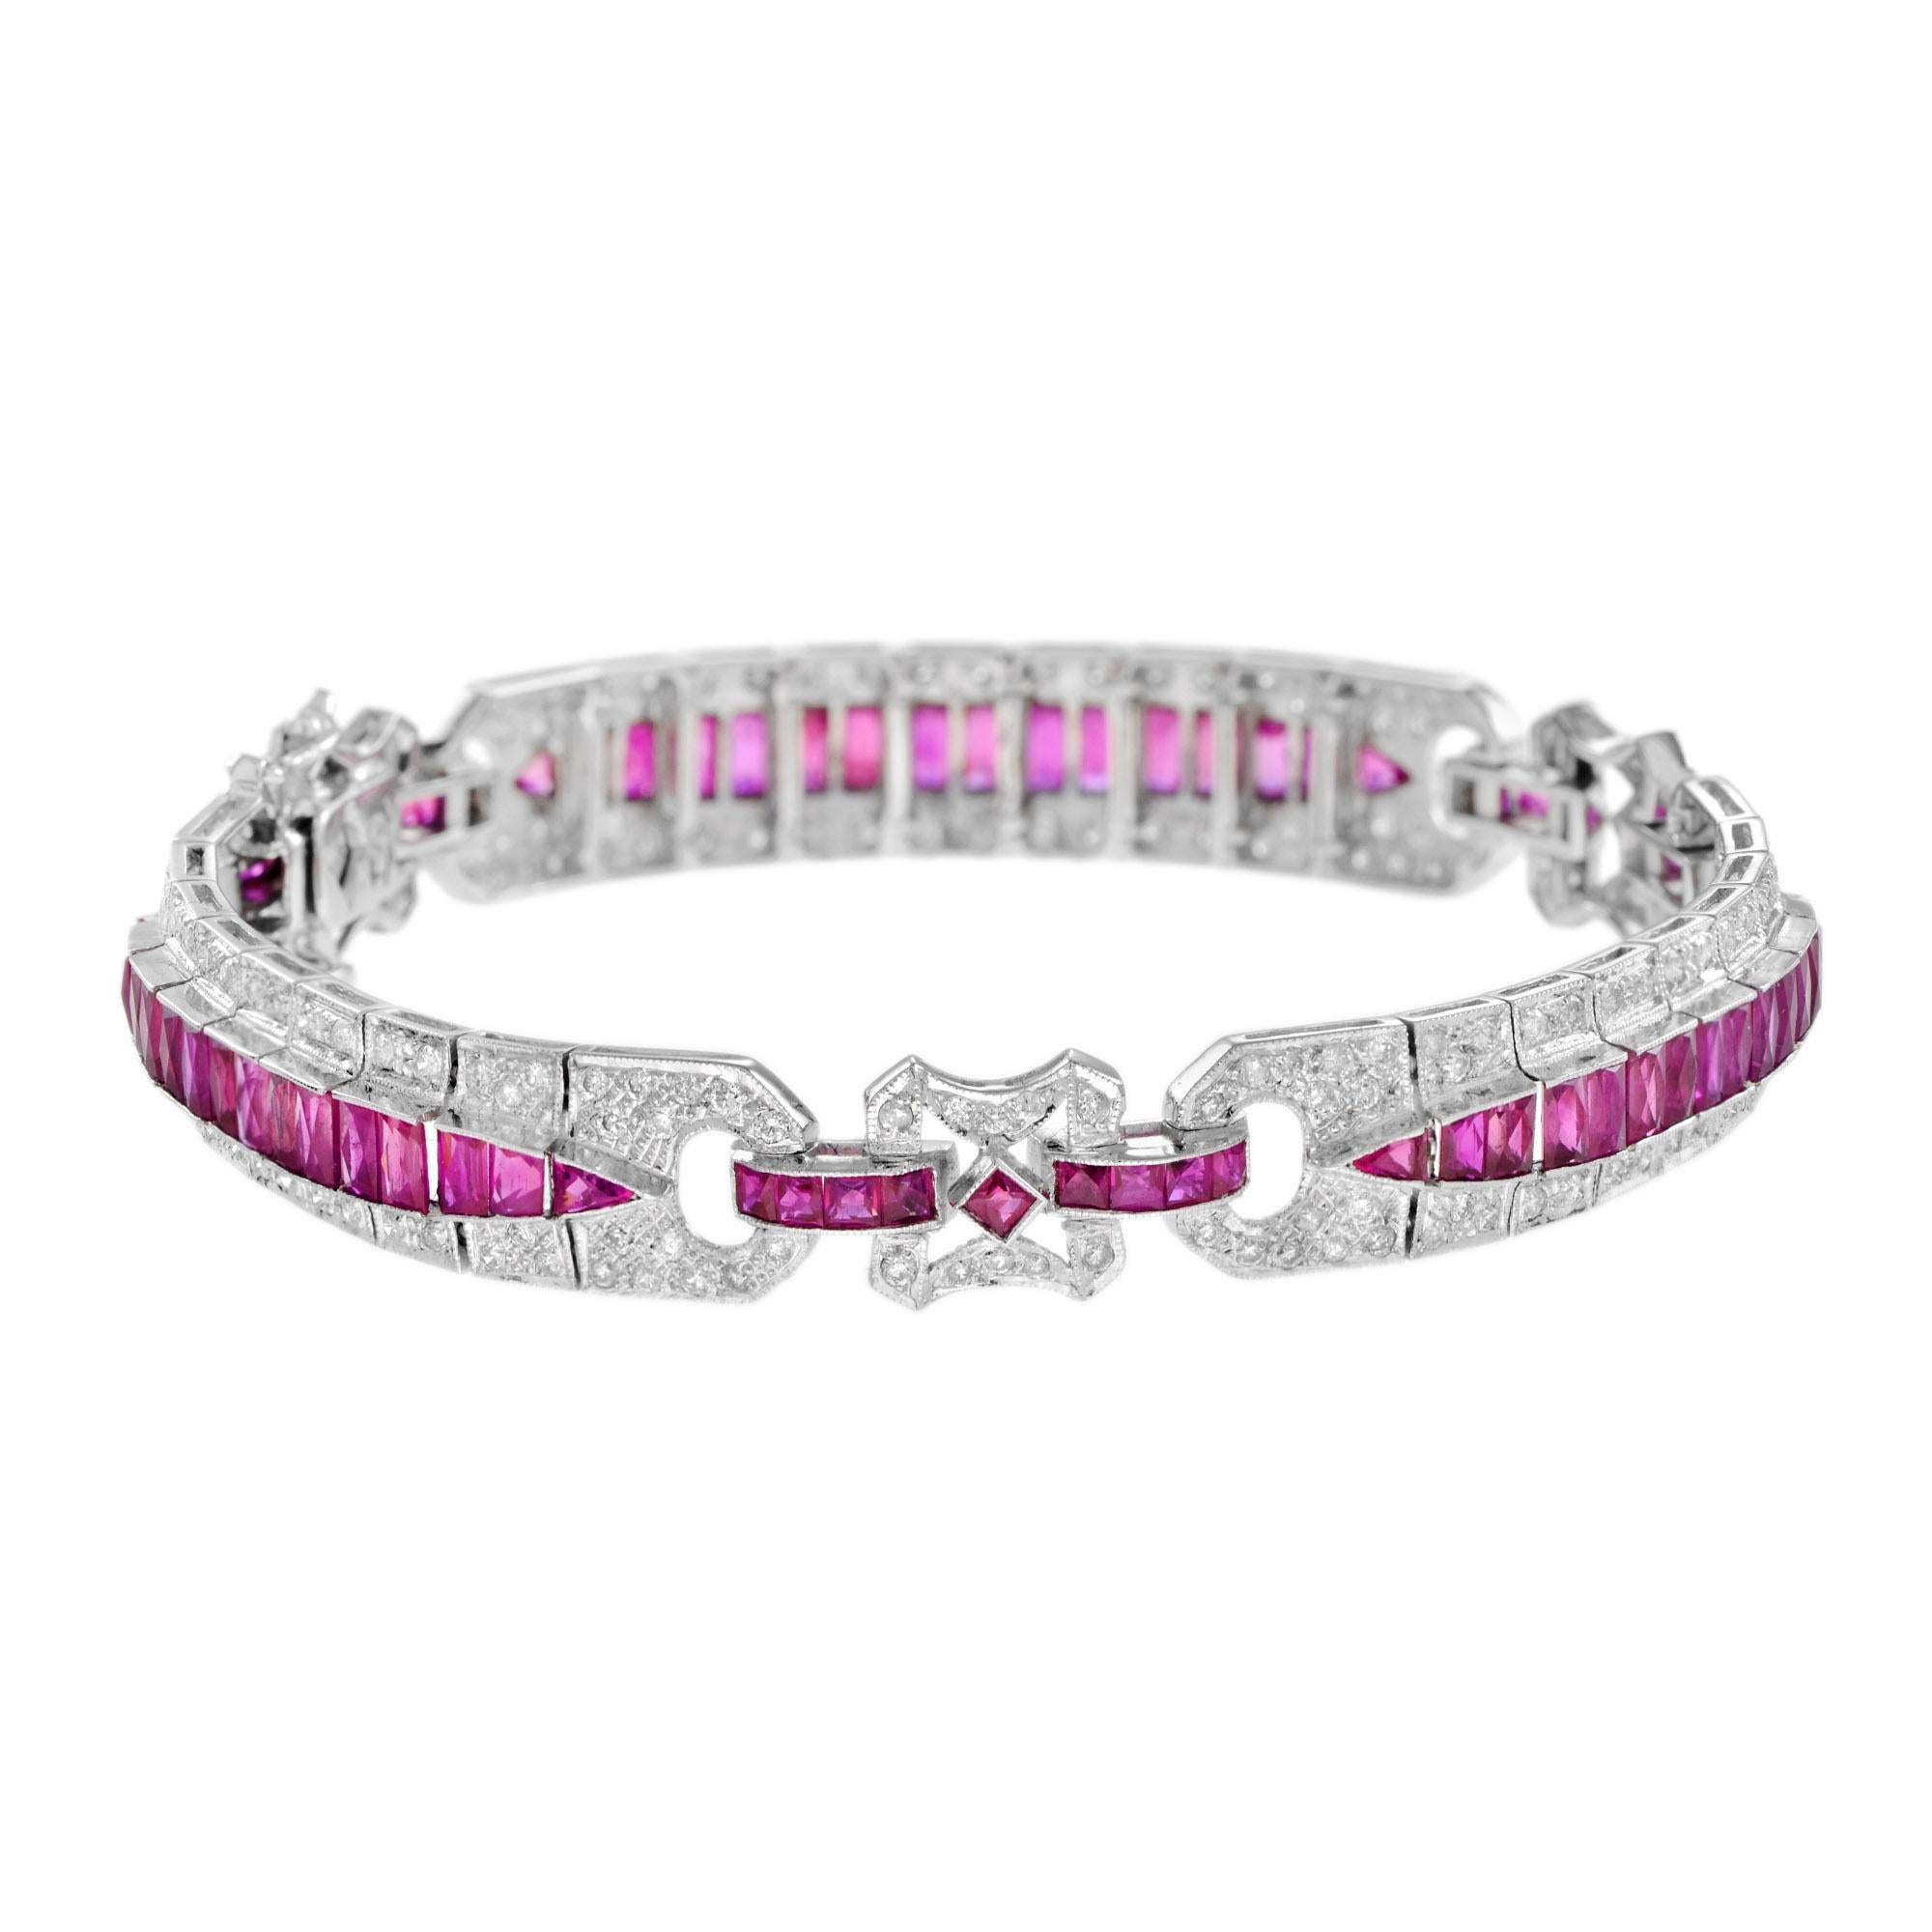 French Cut Art Deco Style 9.76 Ct. Ruby and Diamond Bracelet in 18K White Gold